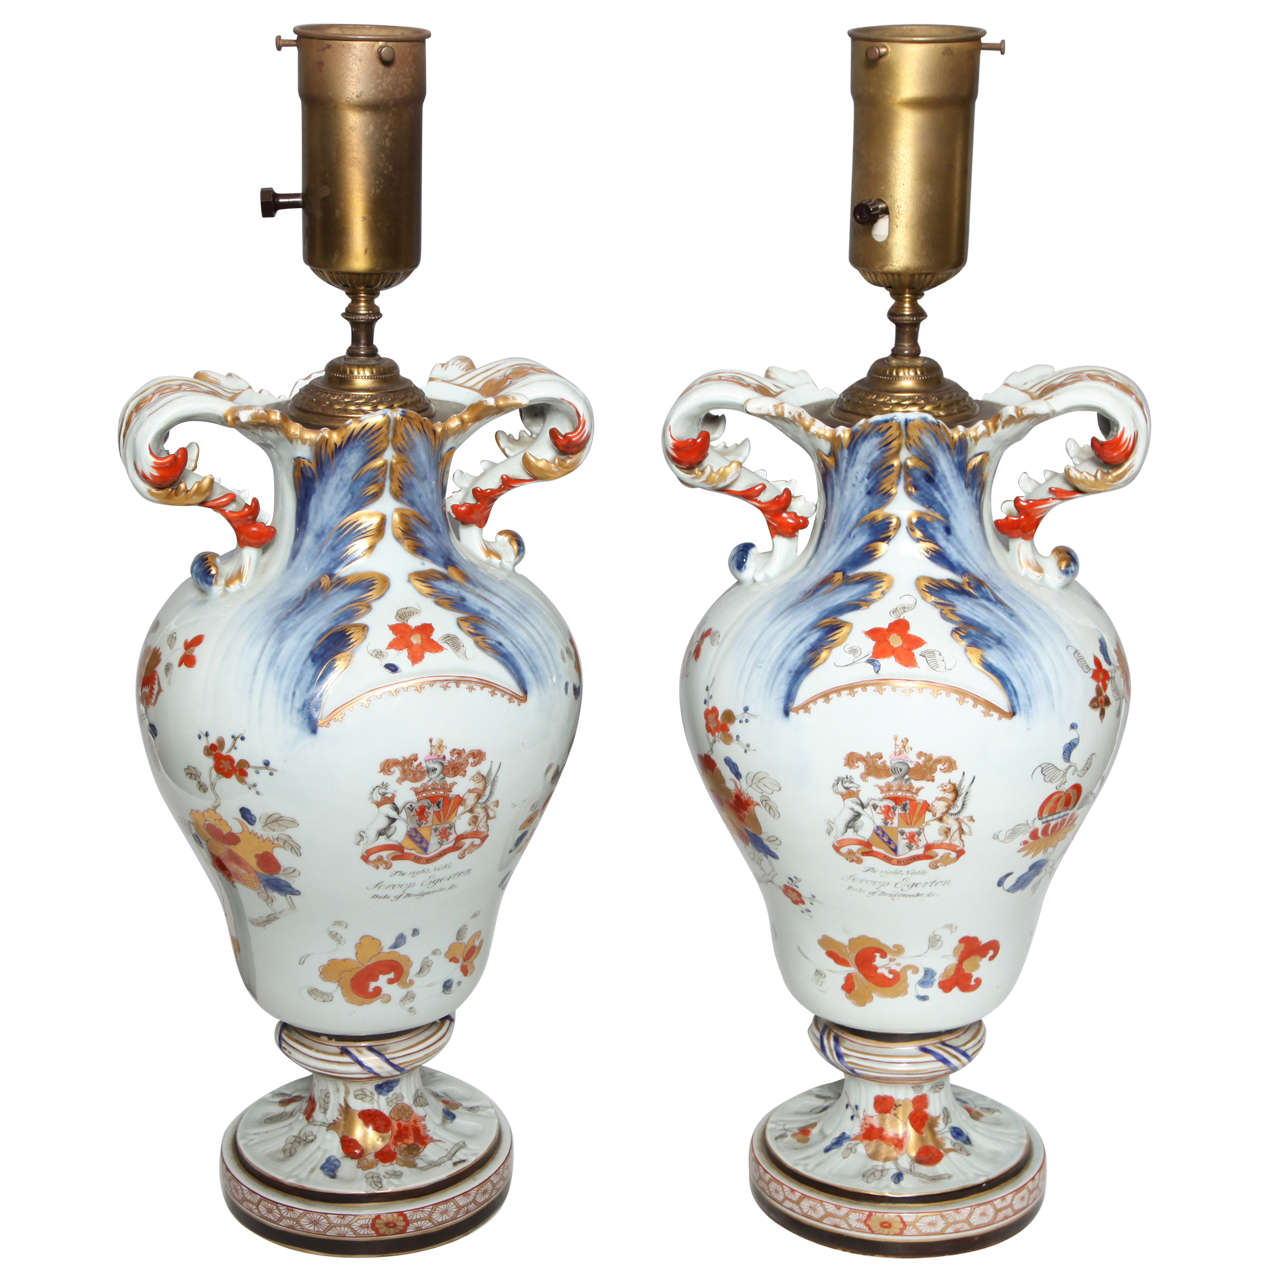 Pair of Antique Chinese Export Porcelain Vases with English Coats of Arms For Sale